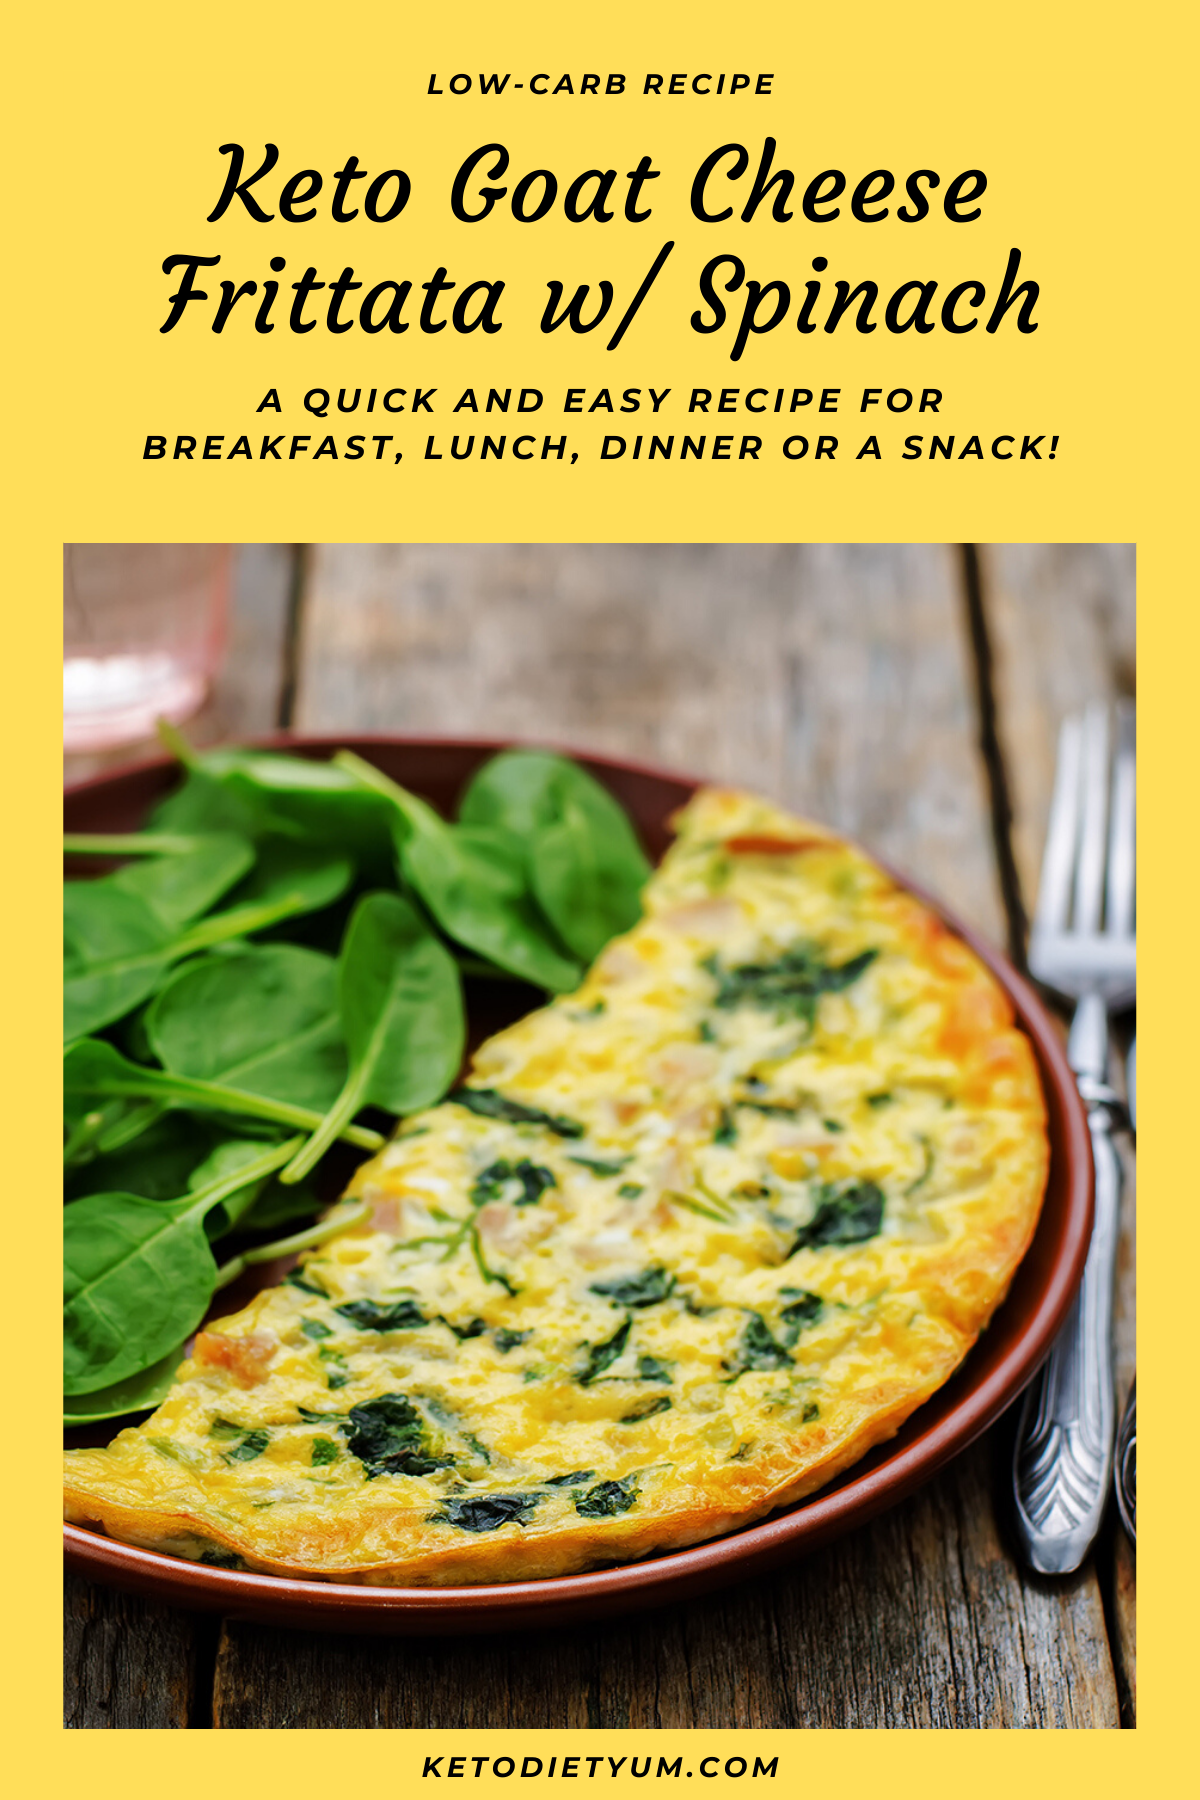 Keto Goat Cheese Frittata with Spinach